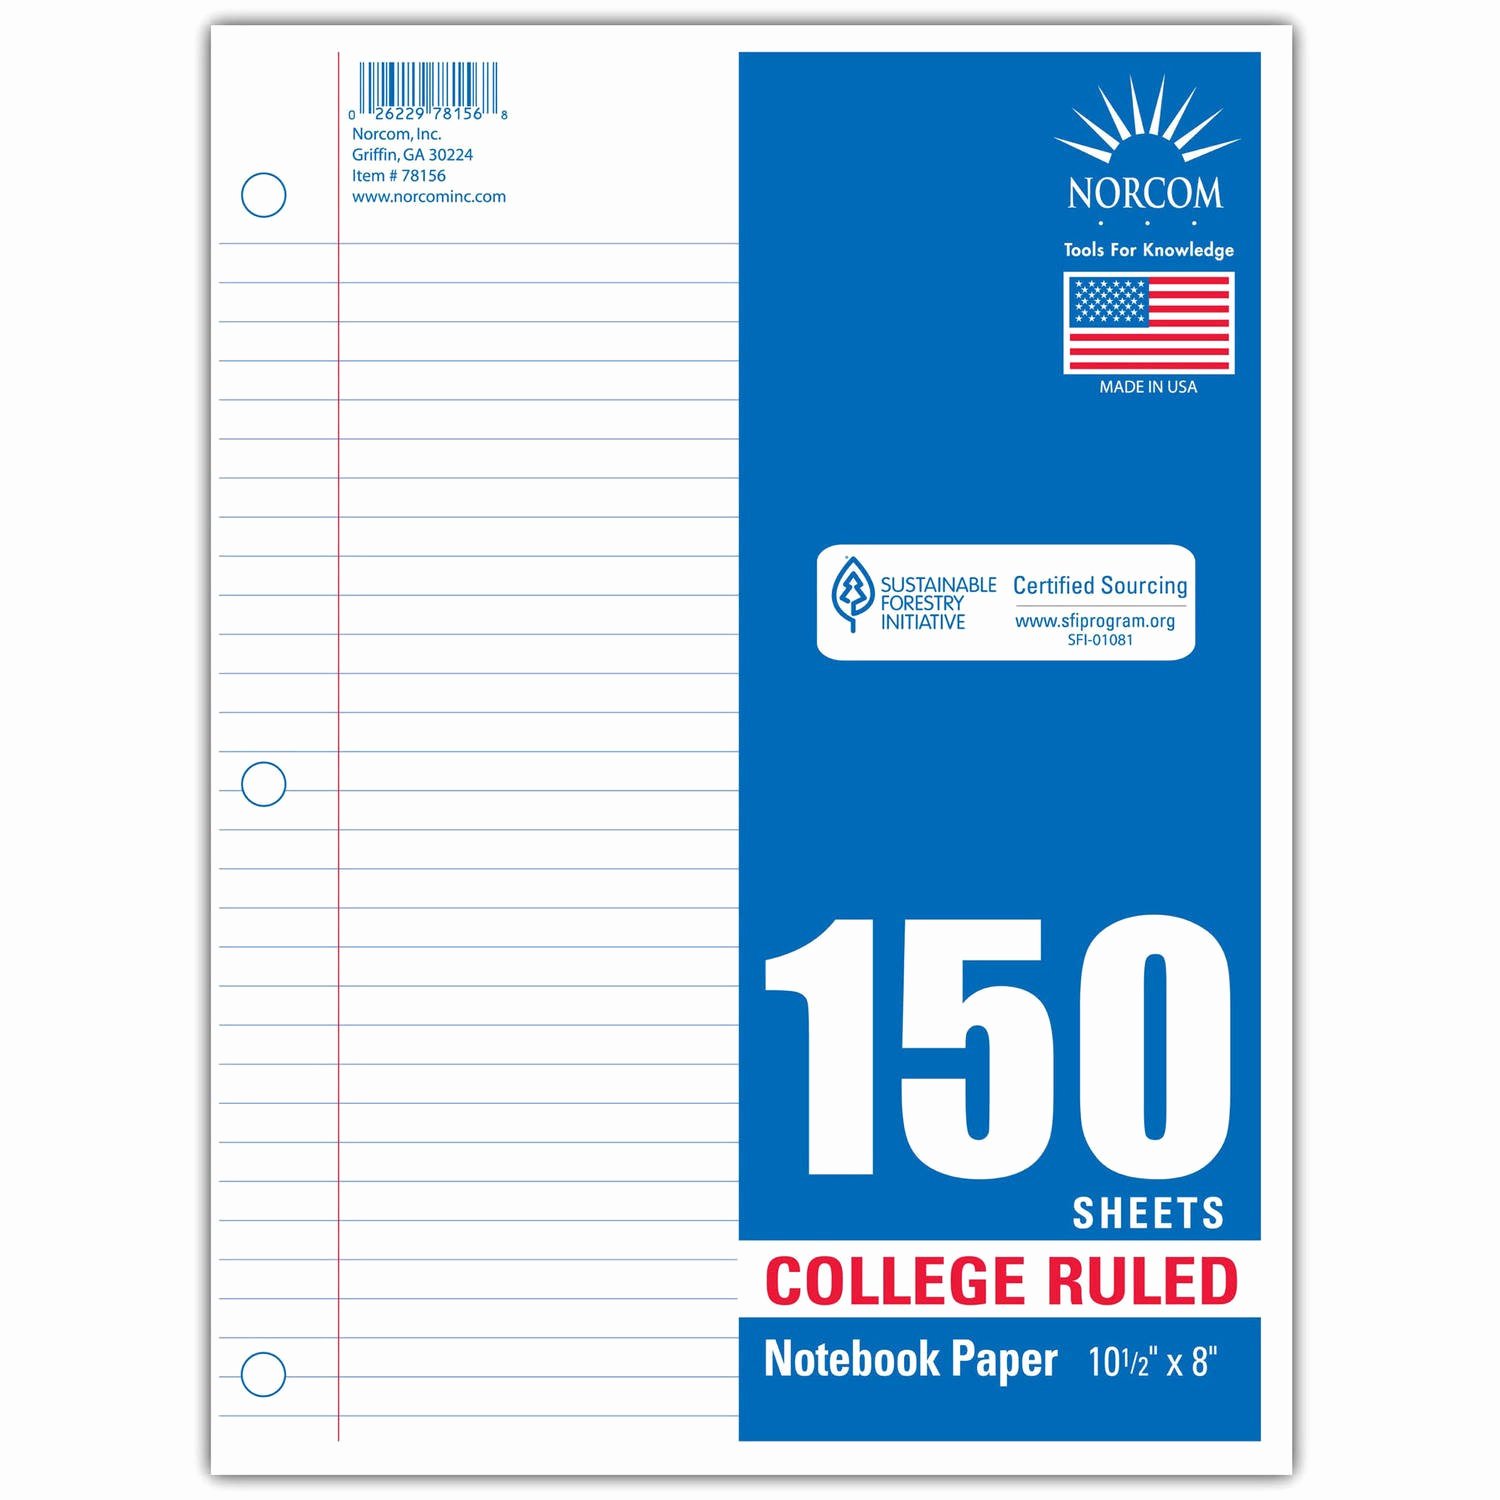 College Ruled Line Paper Awesome nor Filler Paper College Ruled 150 Sheets